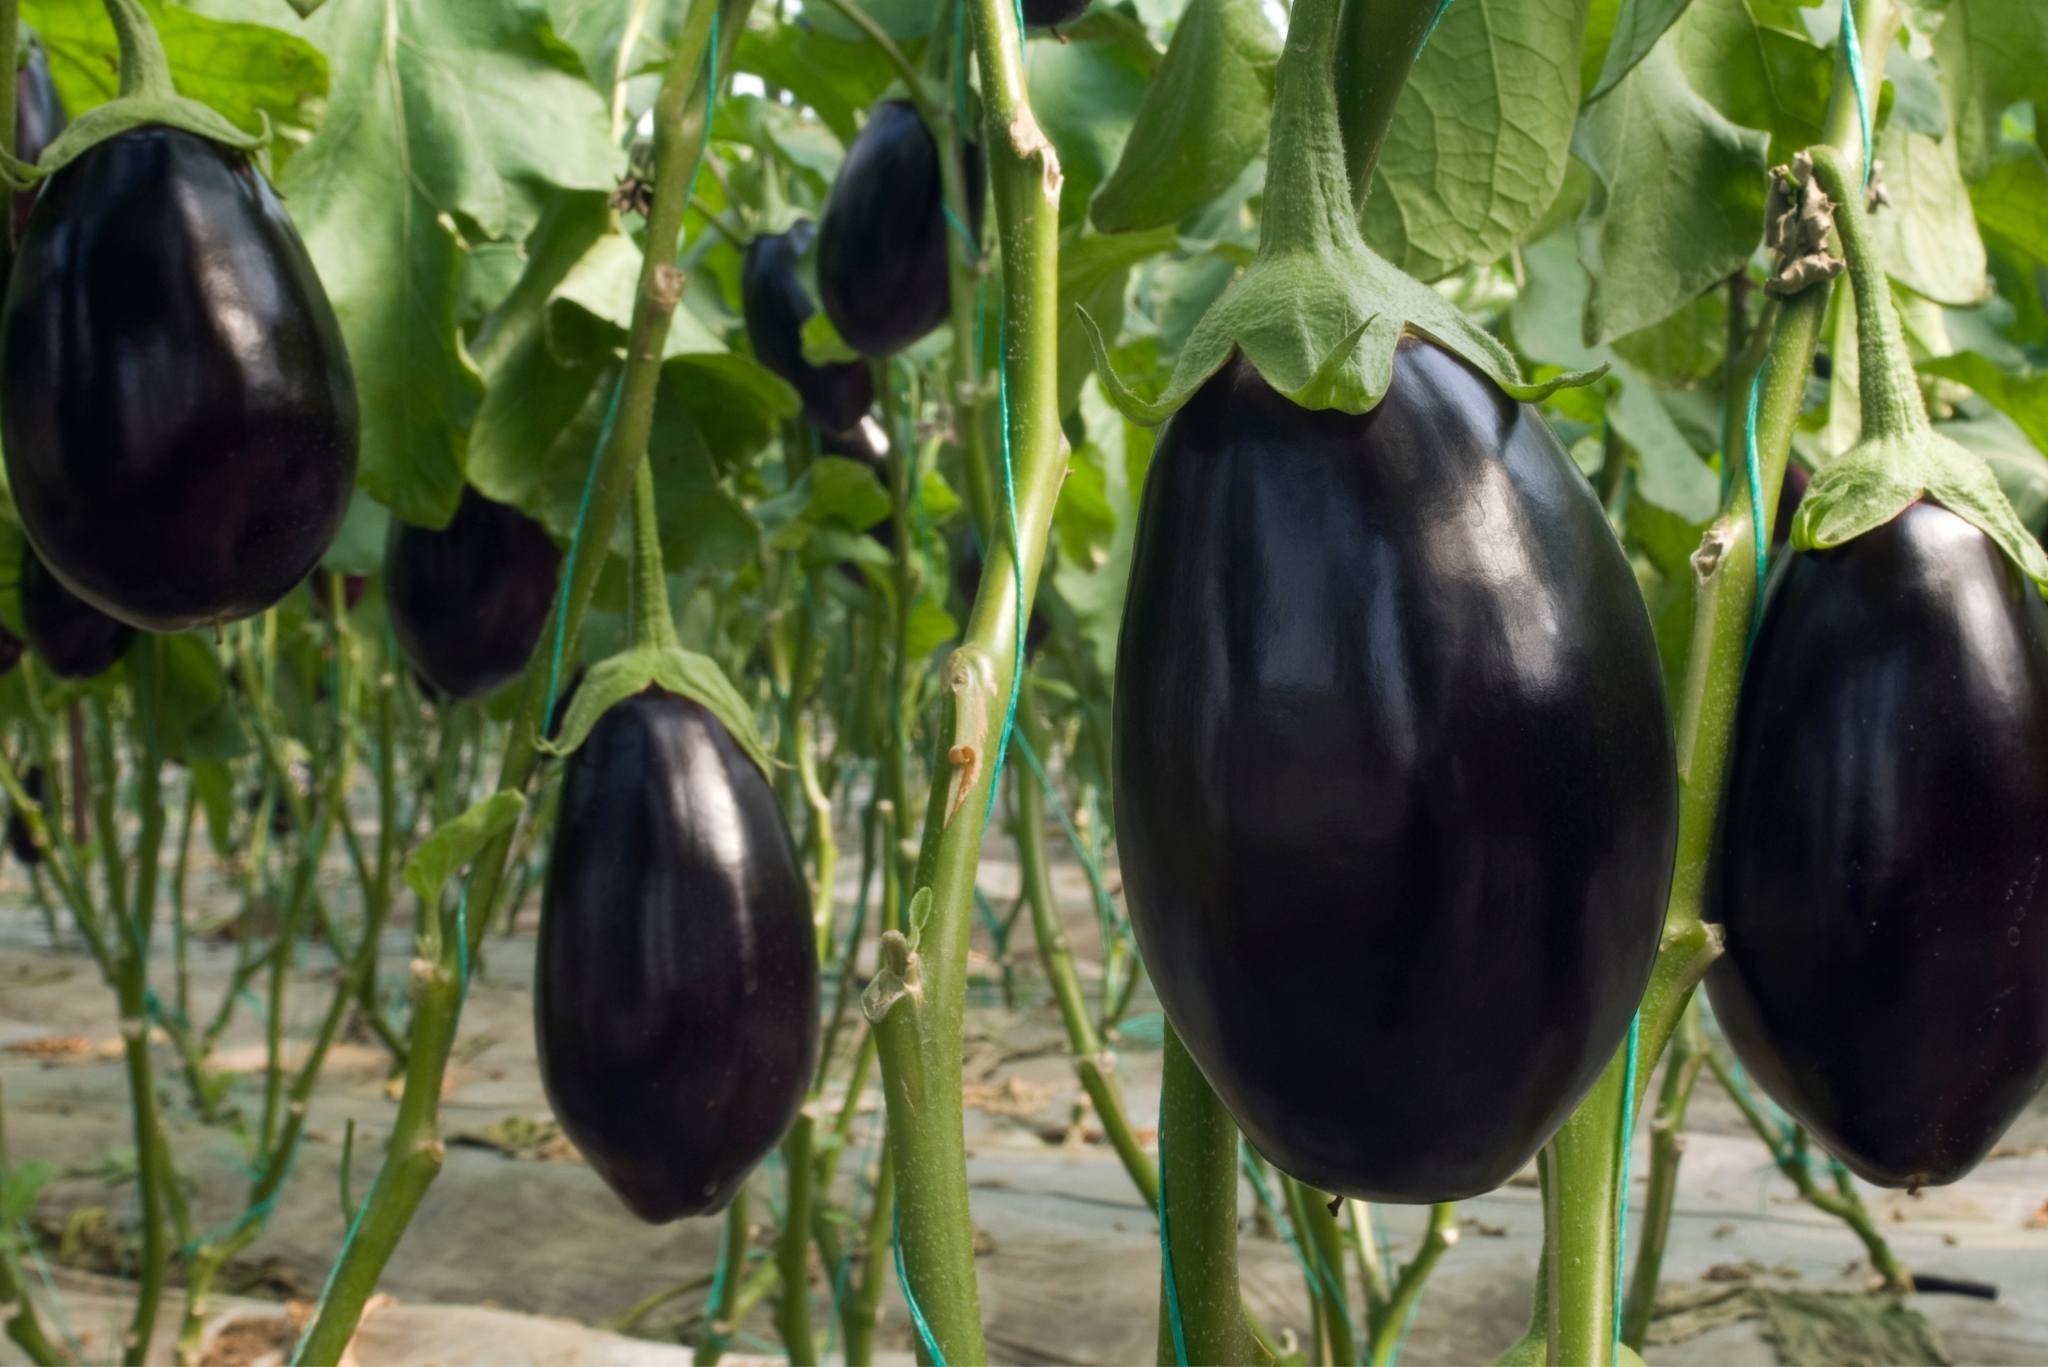 5 Tips For Growing Excellent Eggplant